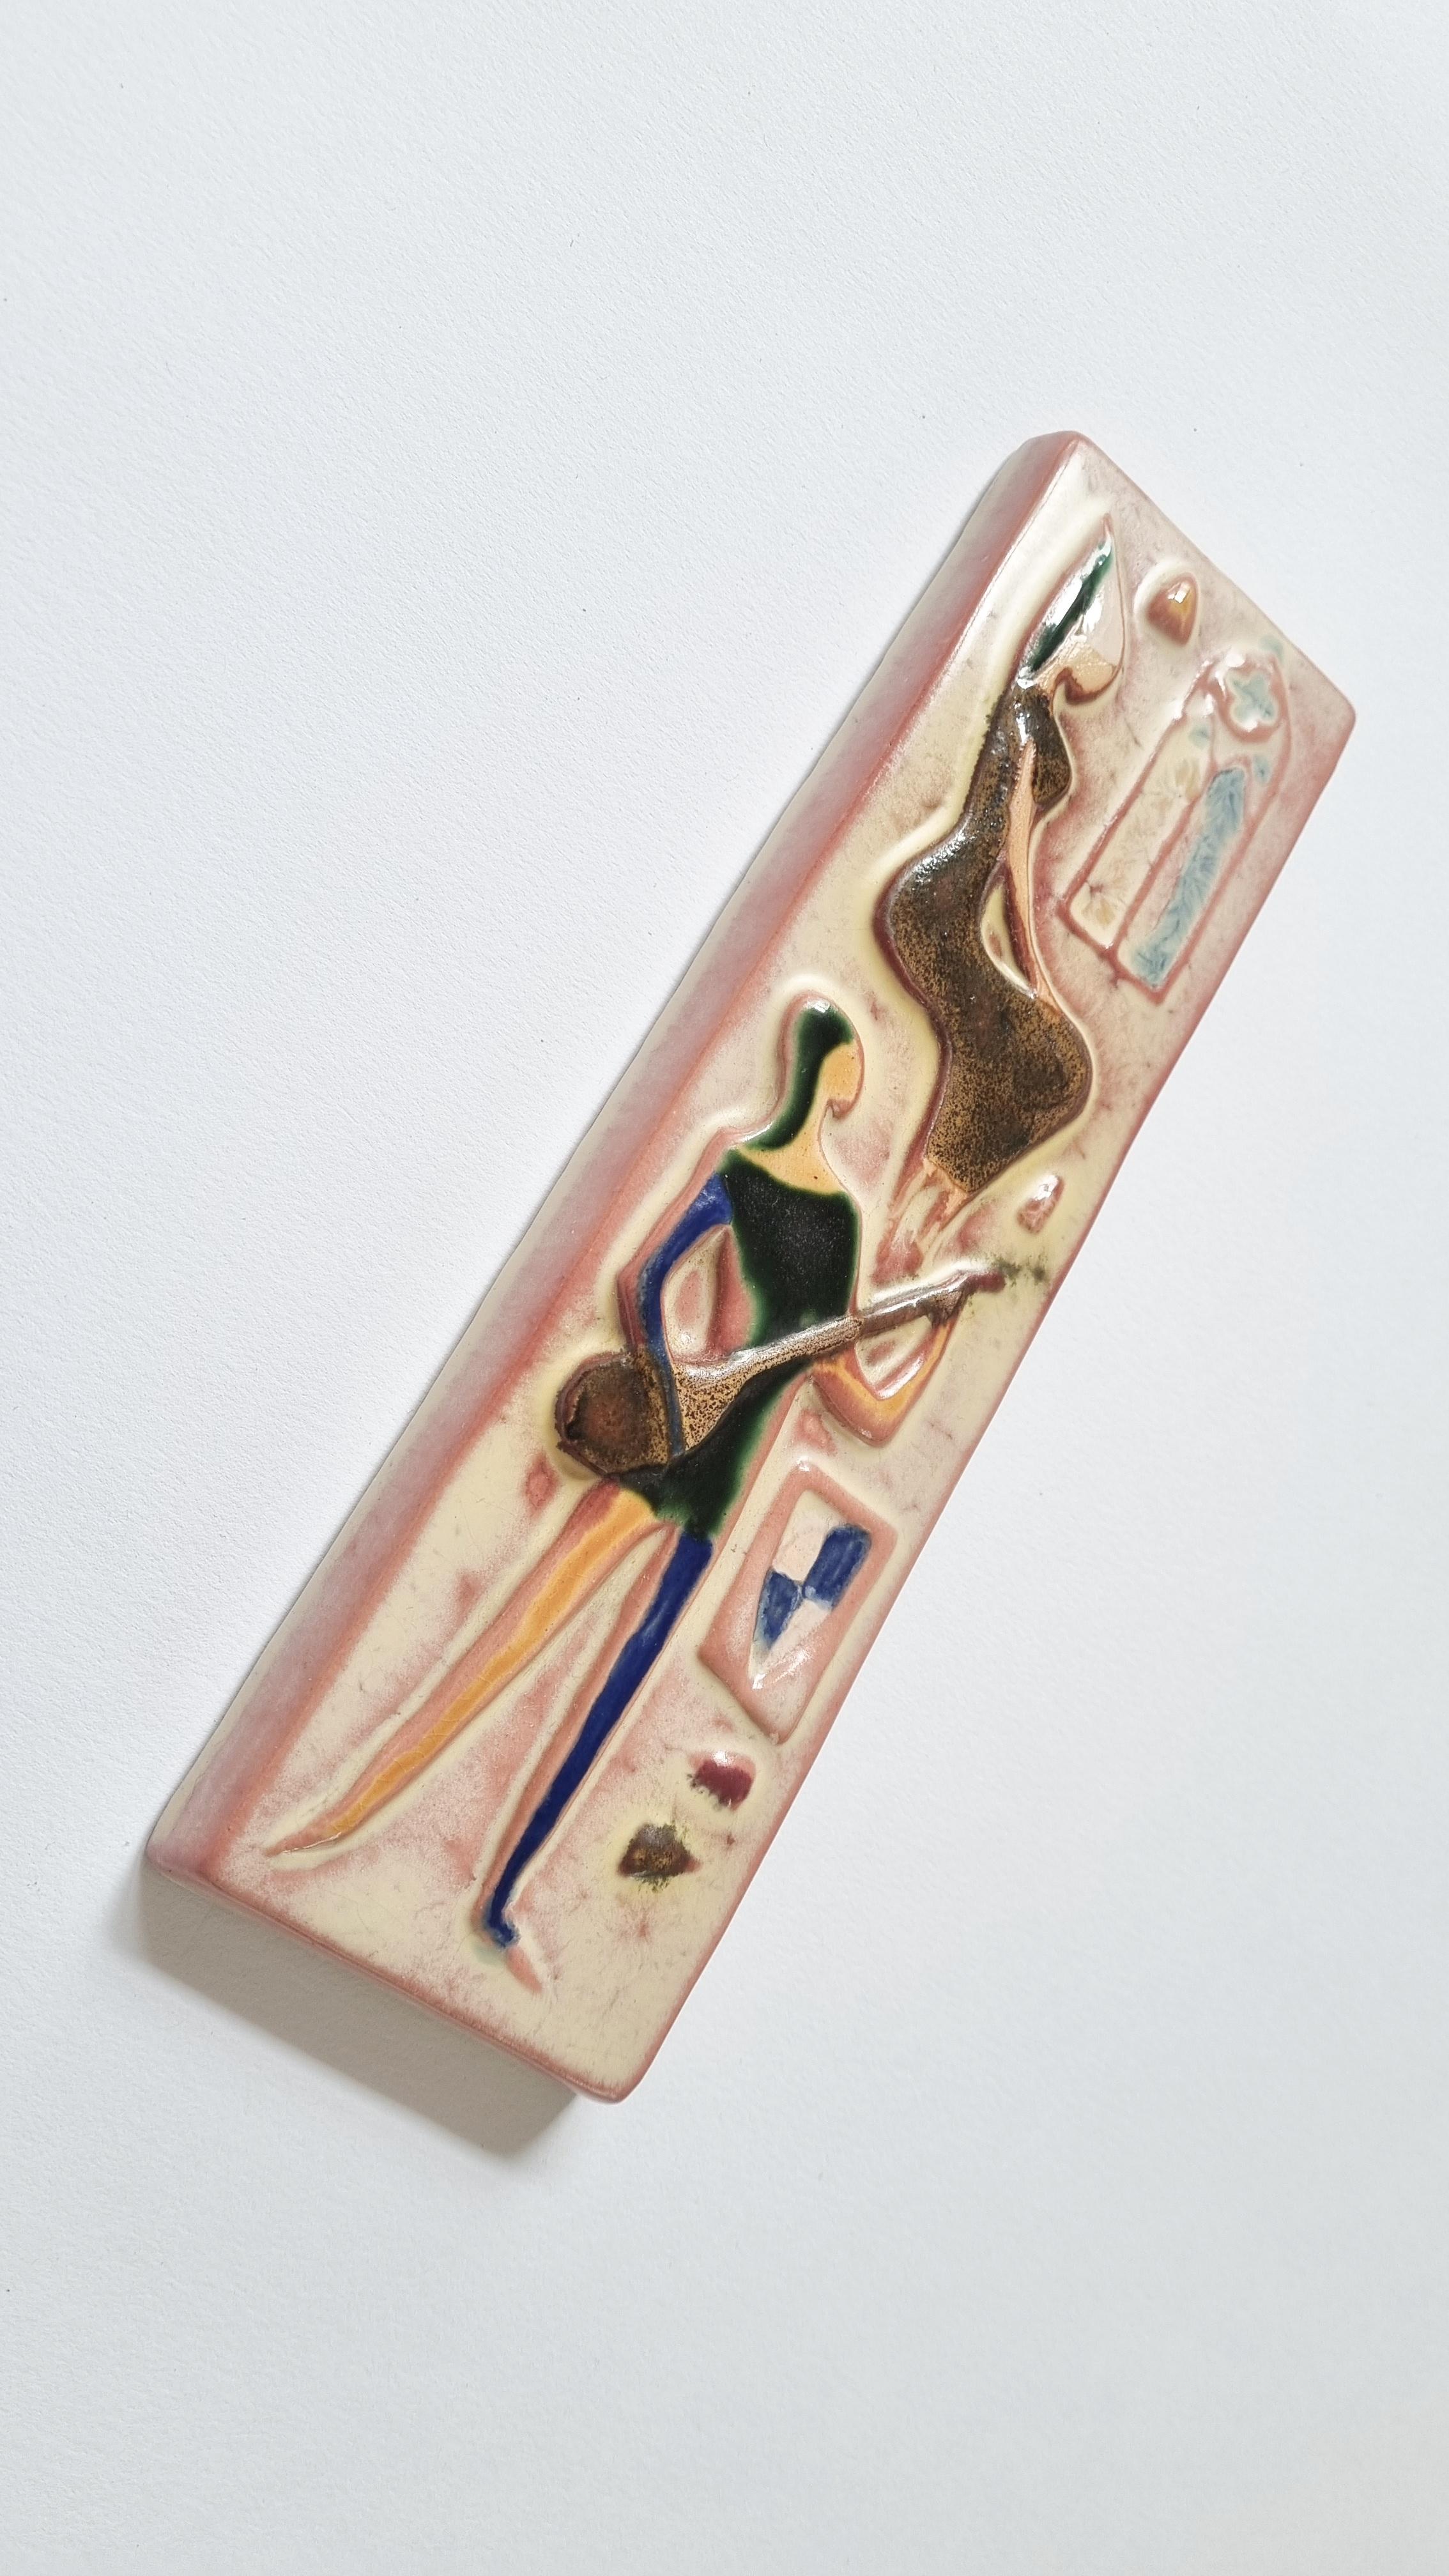 Czech Rare Midcentury Ceramic Wall Sculpture Lovers, Romeo and Juliet, 1970s For Sale